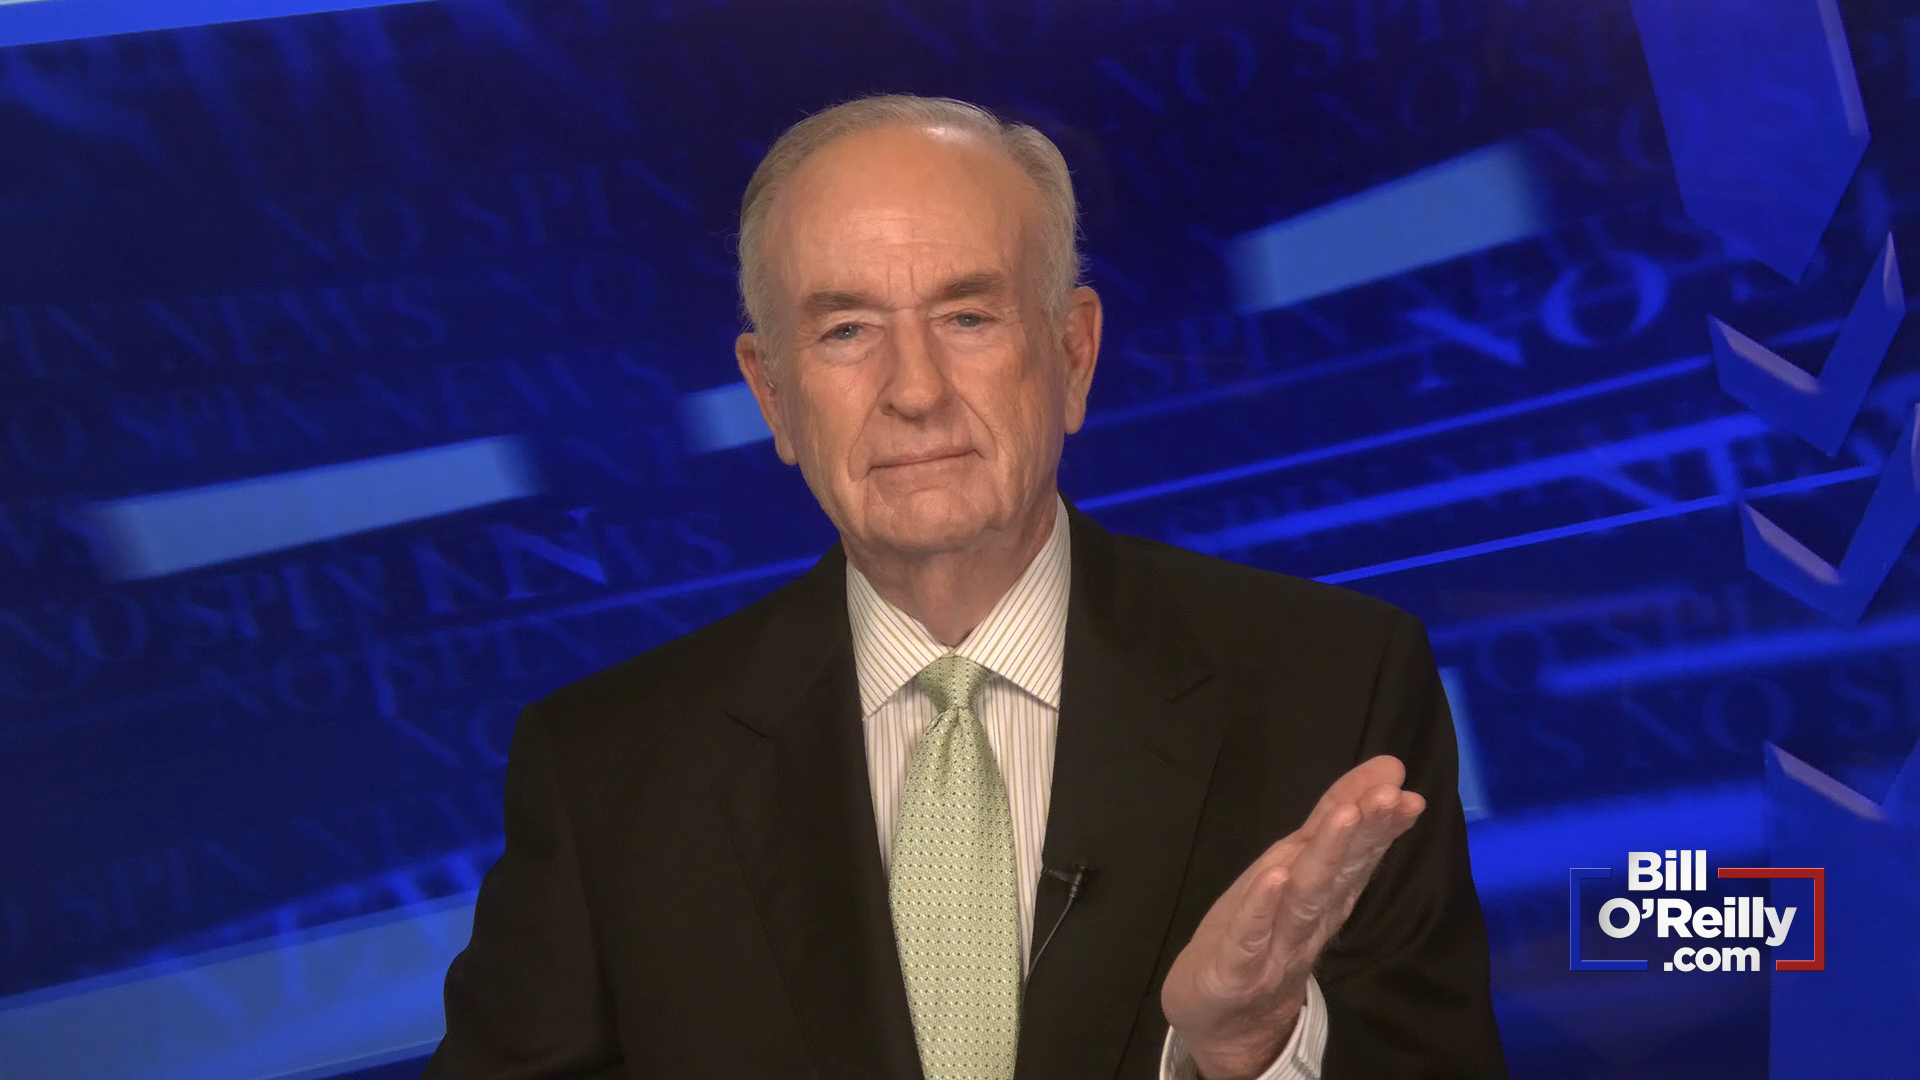 O'Reilly: 'Fauci's a Weasel'